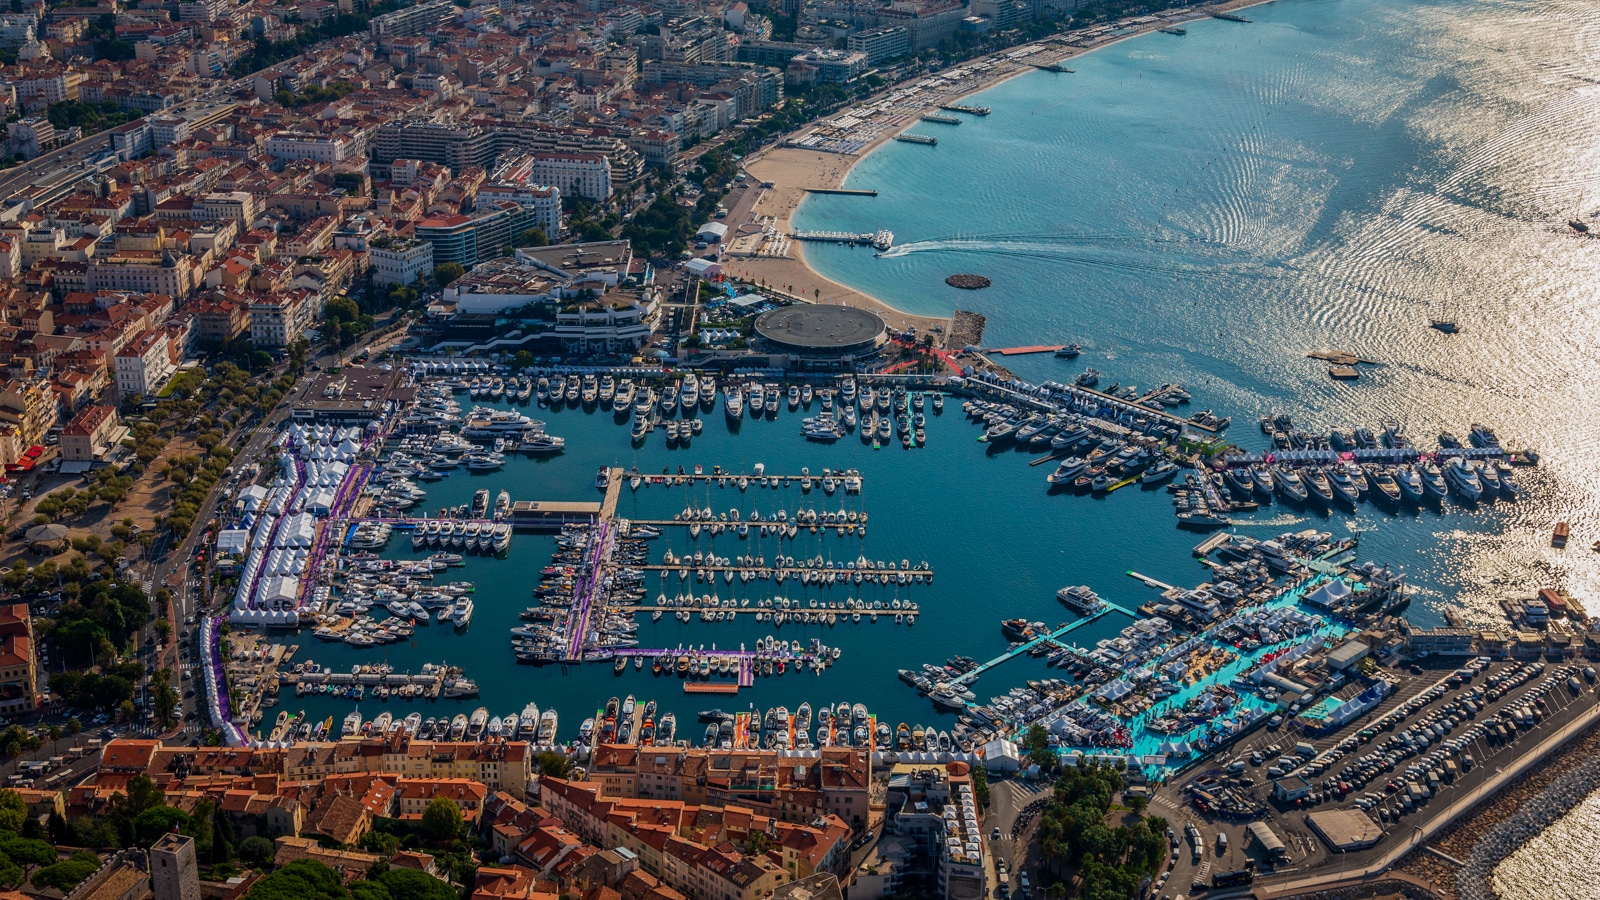 cannes-yachting-festival